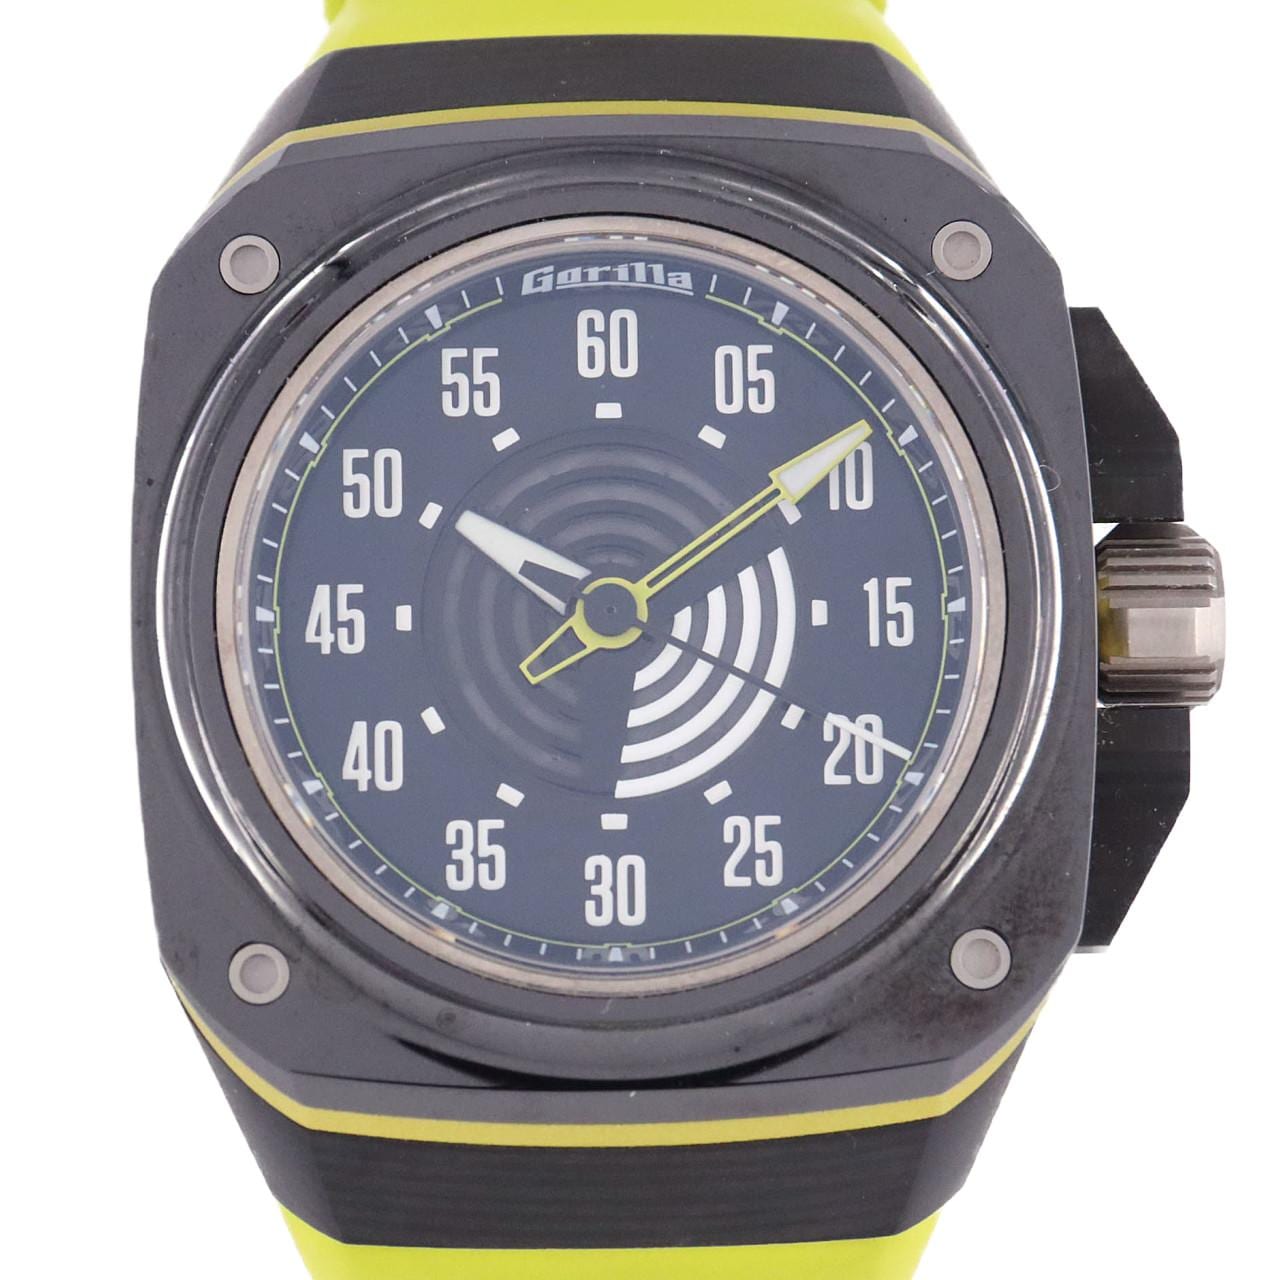 GORILLA Fastback Acid Green FBY4.0 Carbon Automatic